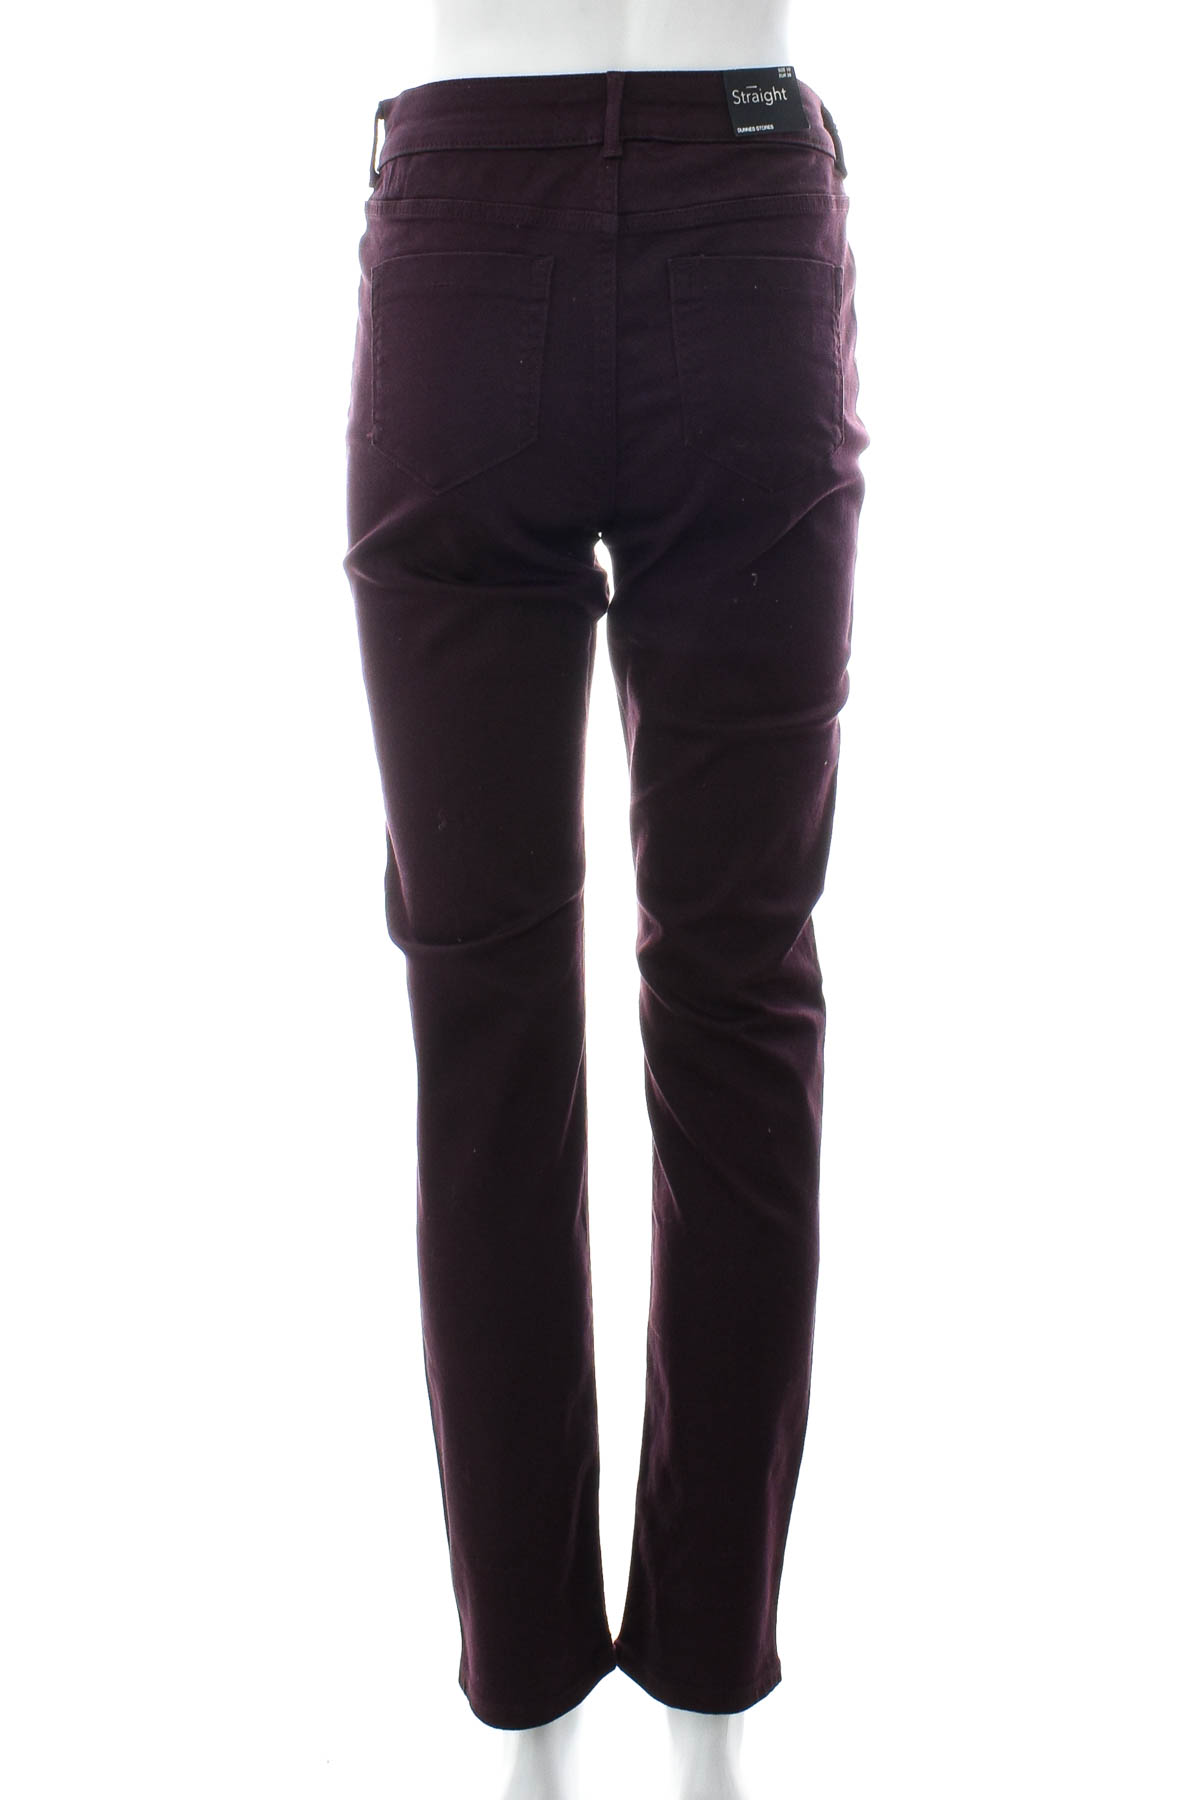 Women's trousers - Dunnes Stores - 1